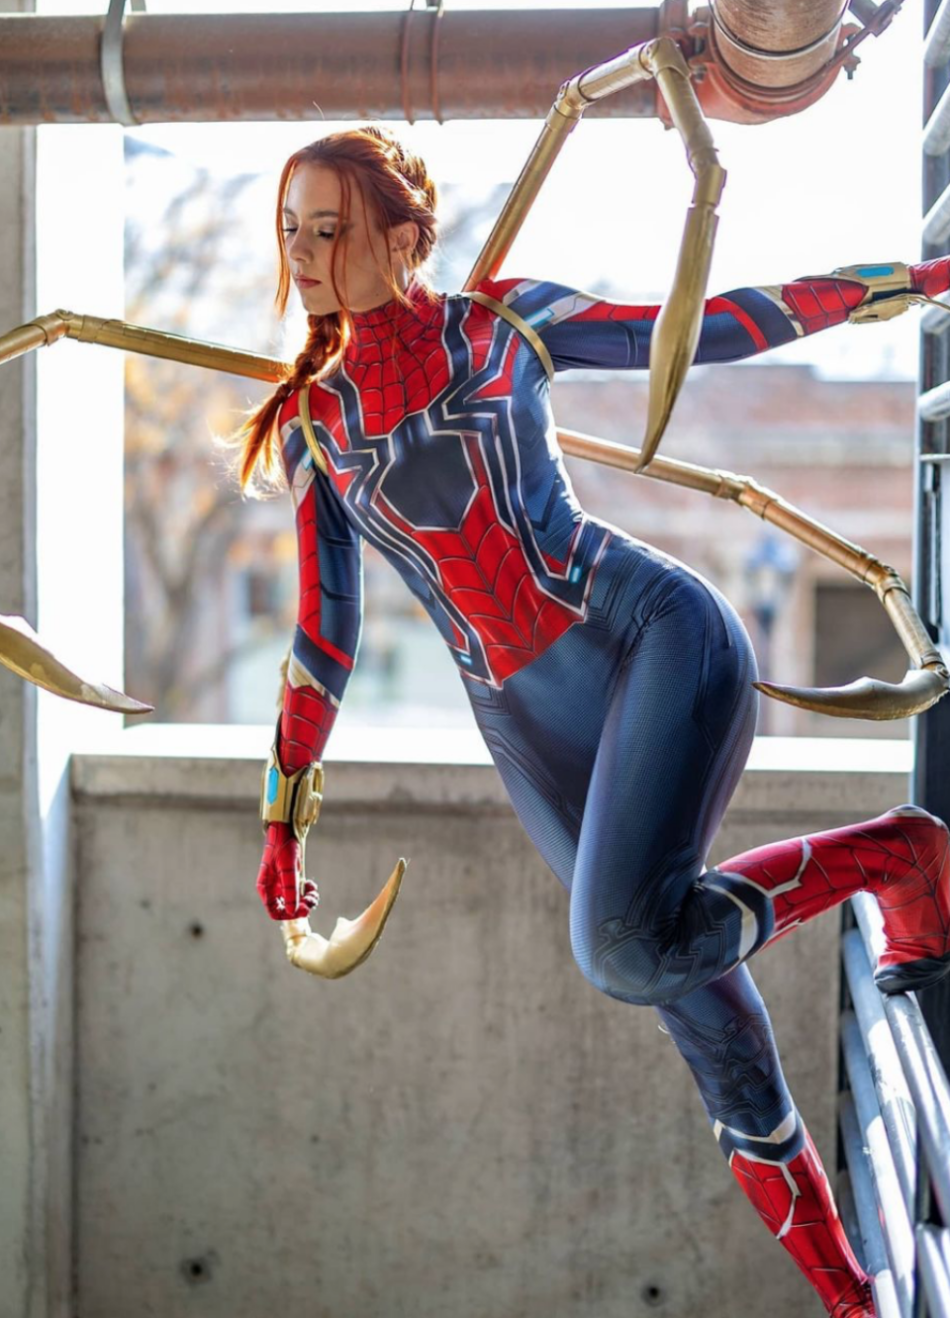 Sexy Red Hot Cosplay Girls Spiderman Women Best Photo Compilation 2021 (89 HQ Photos) 121